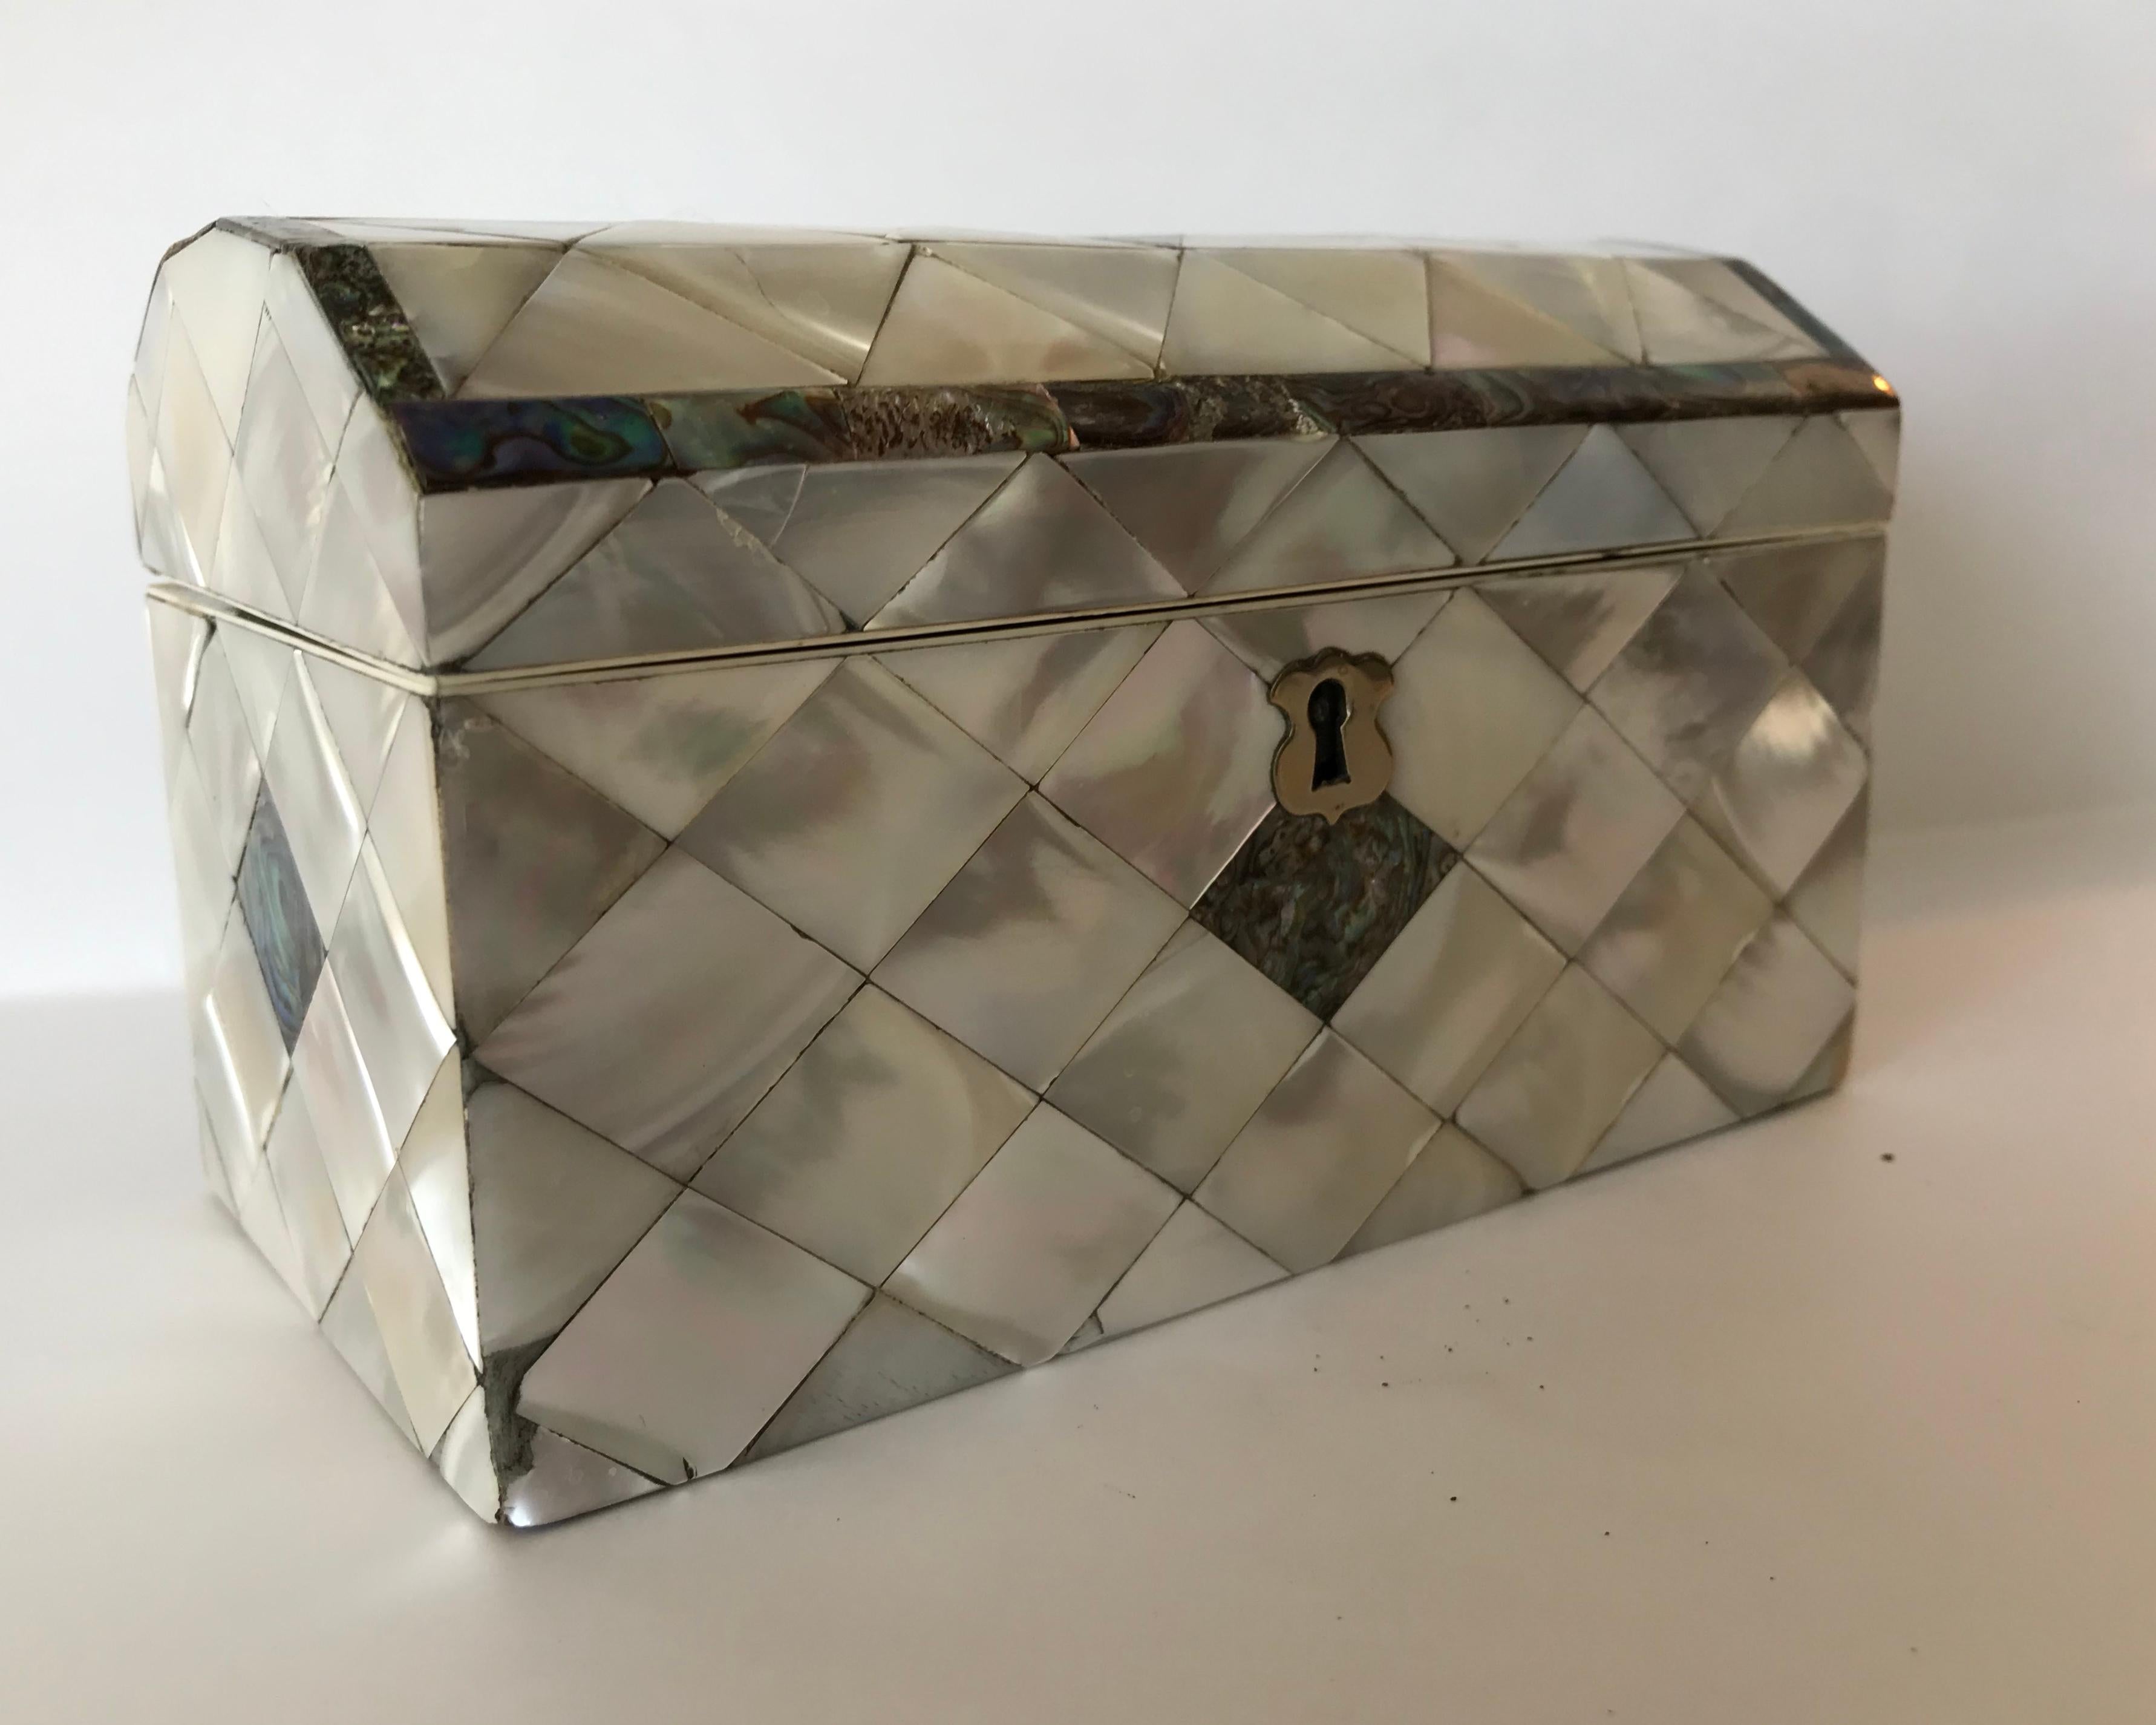 Finely fashioned in a traditional casket form with gleaming shell work - 
A superb and eye catching box.